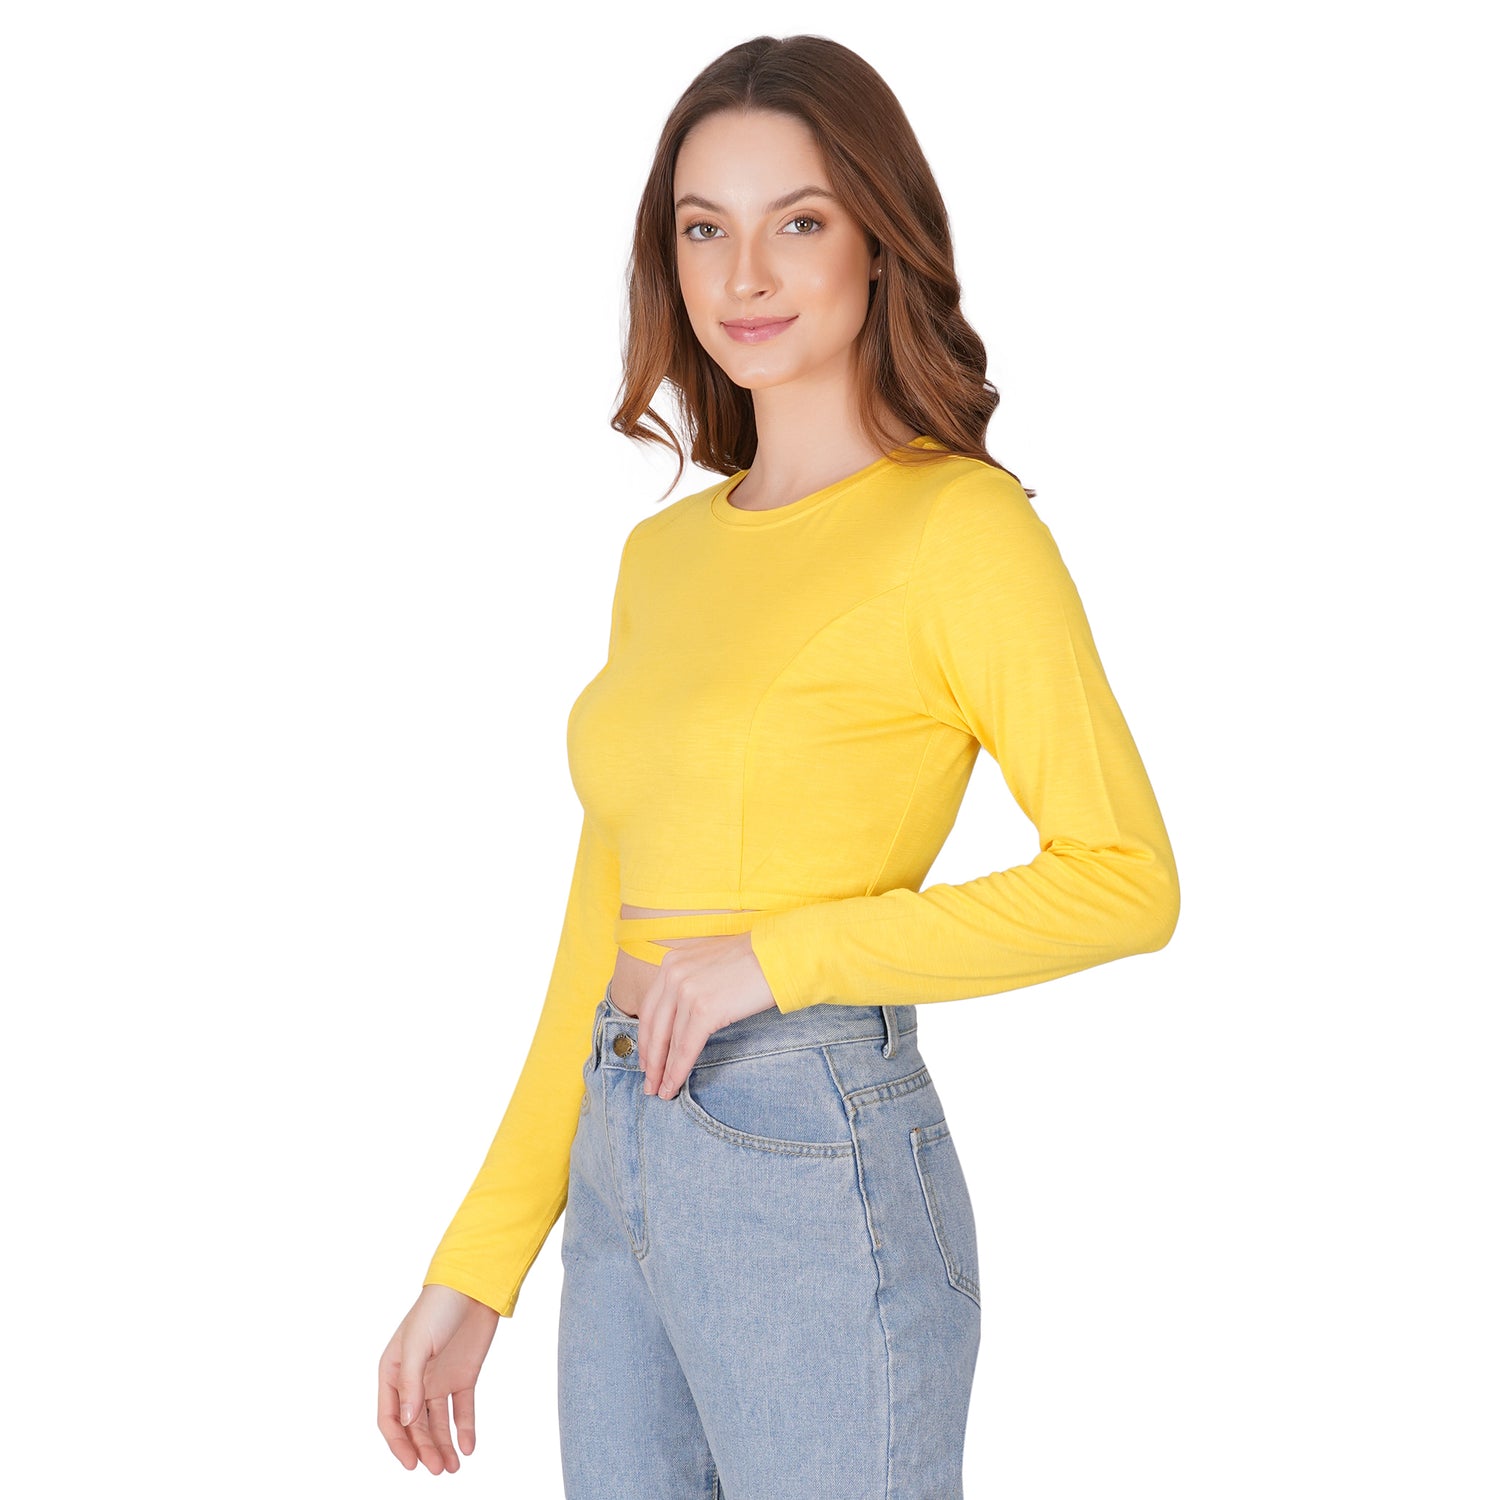 SLAY. Women's Yellow Full Sleeves Crop Top with Back Wrap around Strings-clothing-to-slay.myshopify.com-Crop Top